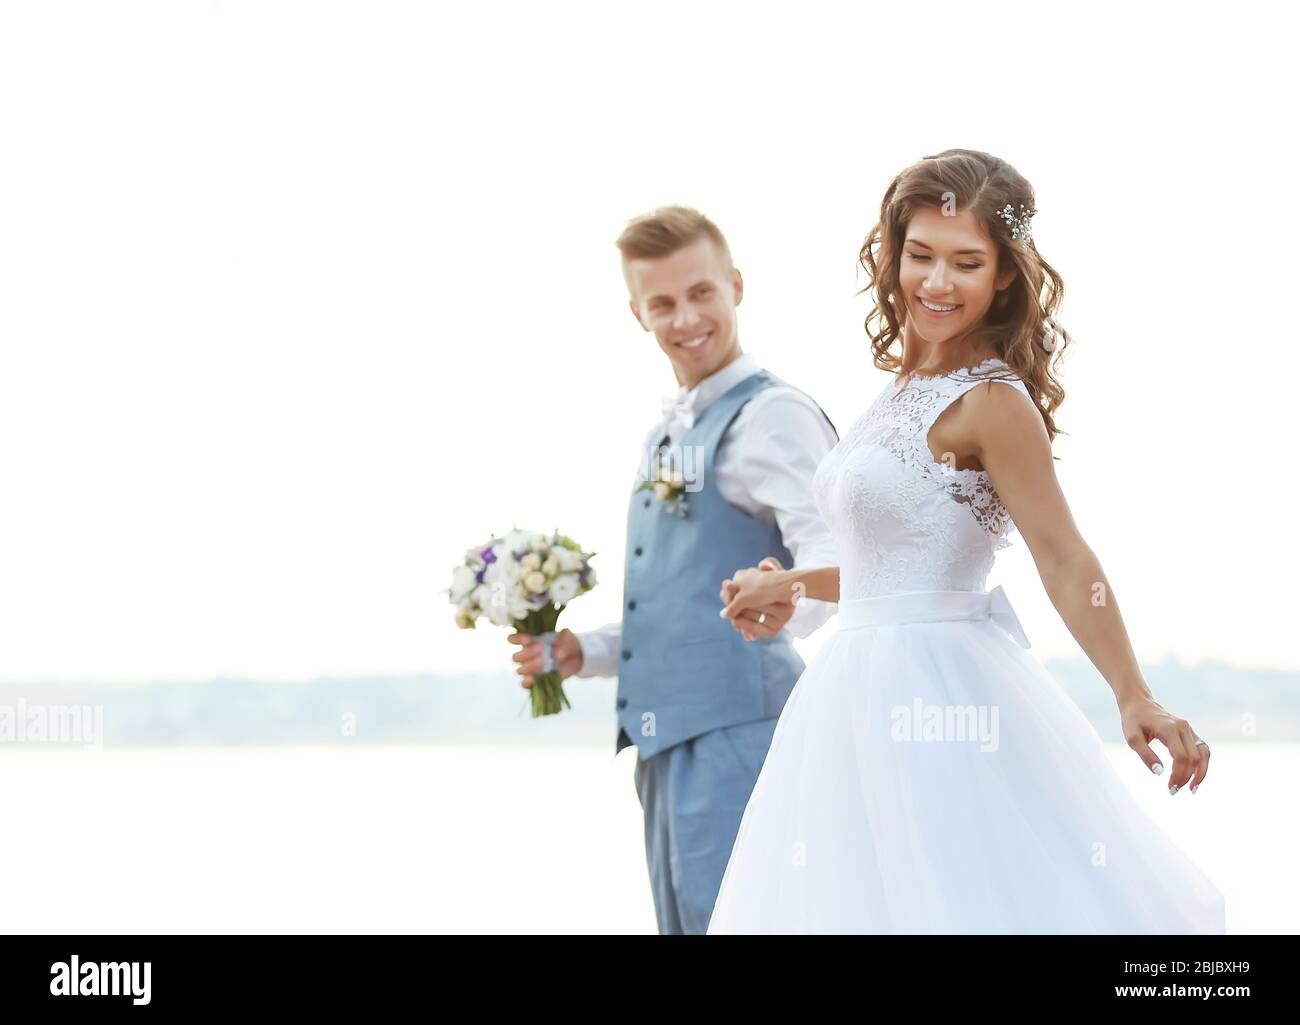 Beautiful wedding couple outdoors on light blurred background, close up view Stock Photo